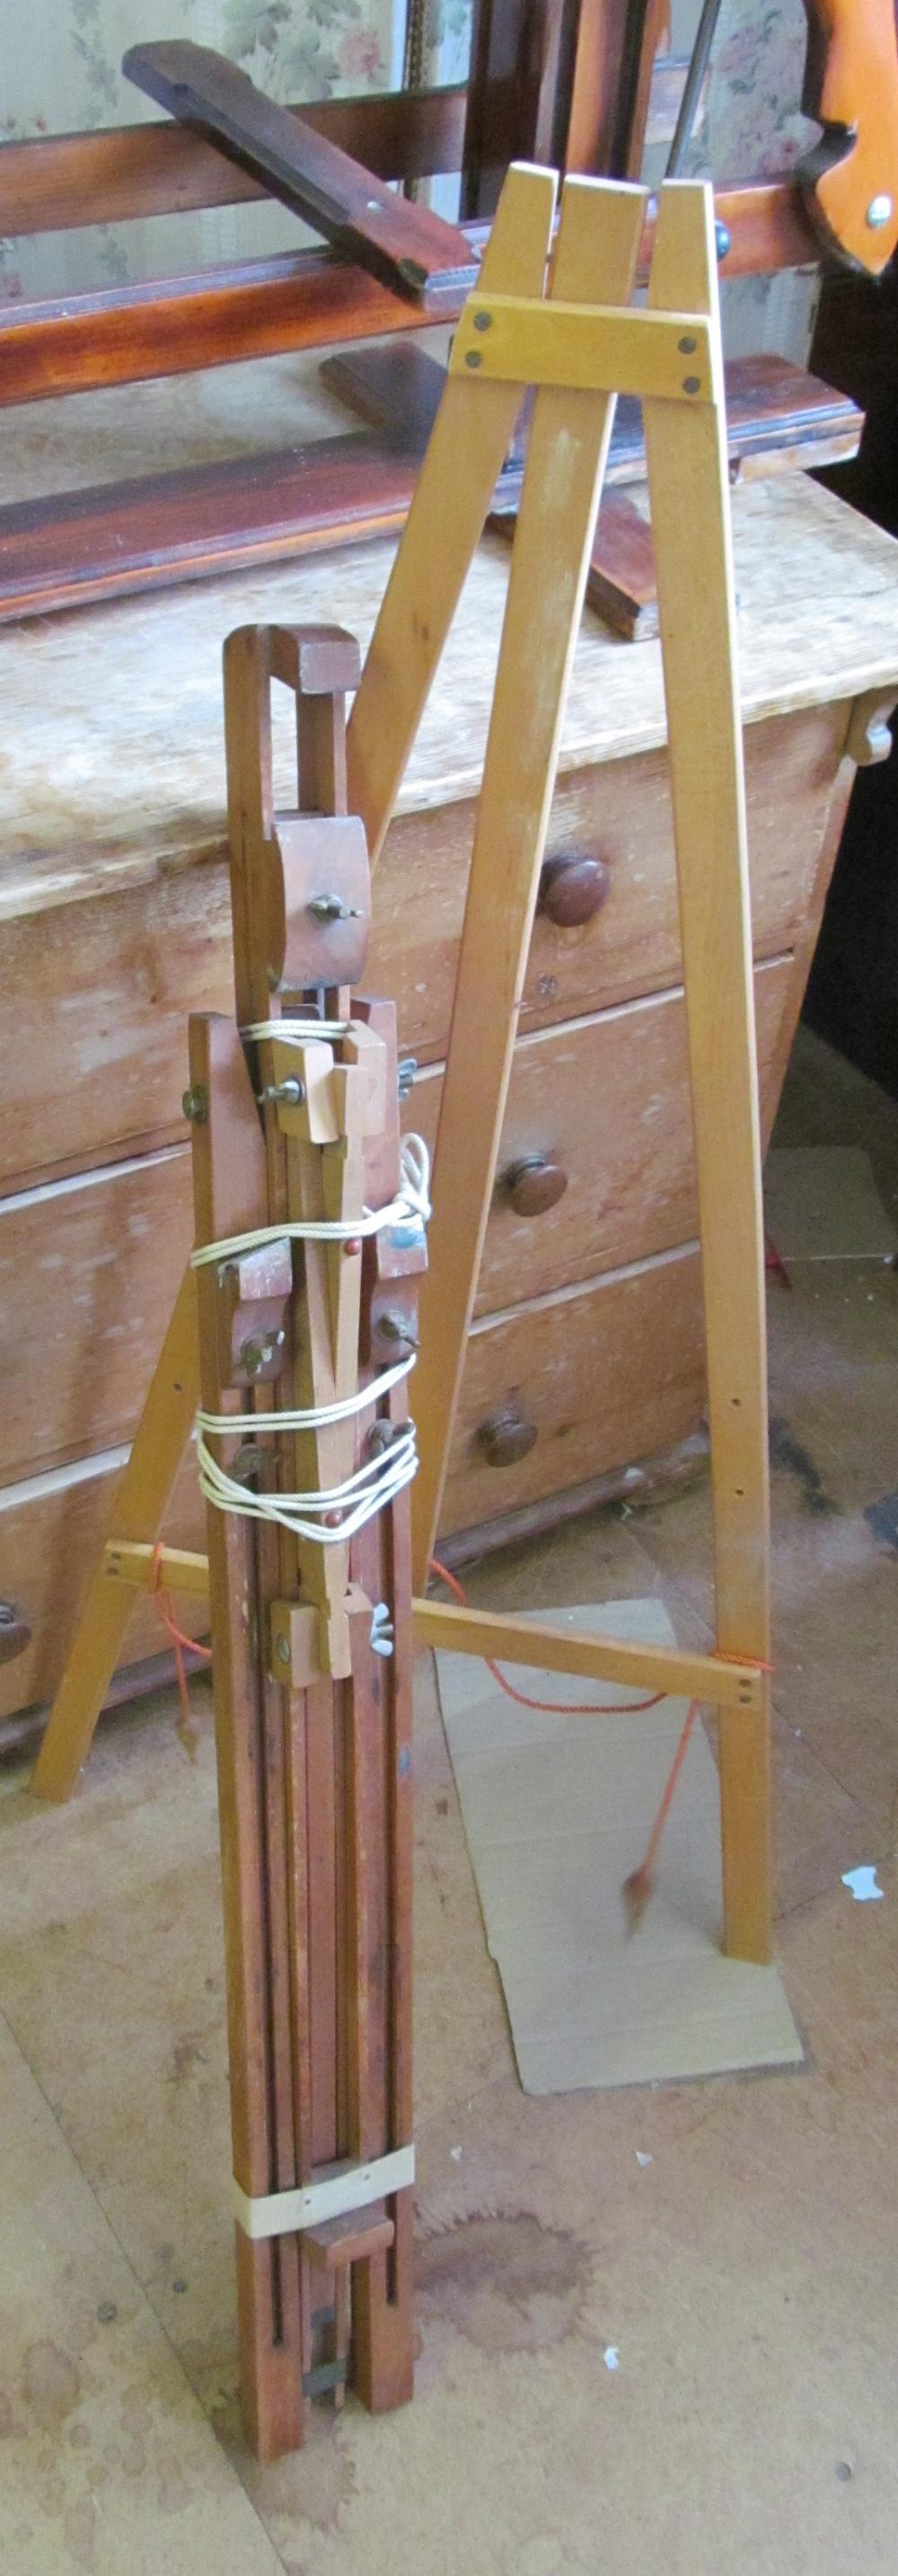 A folding easel and another small easel